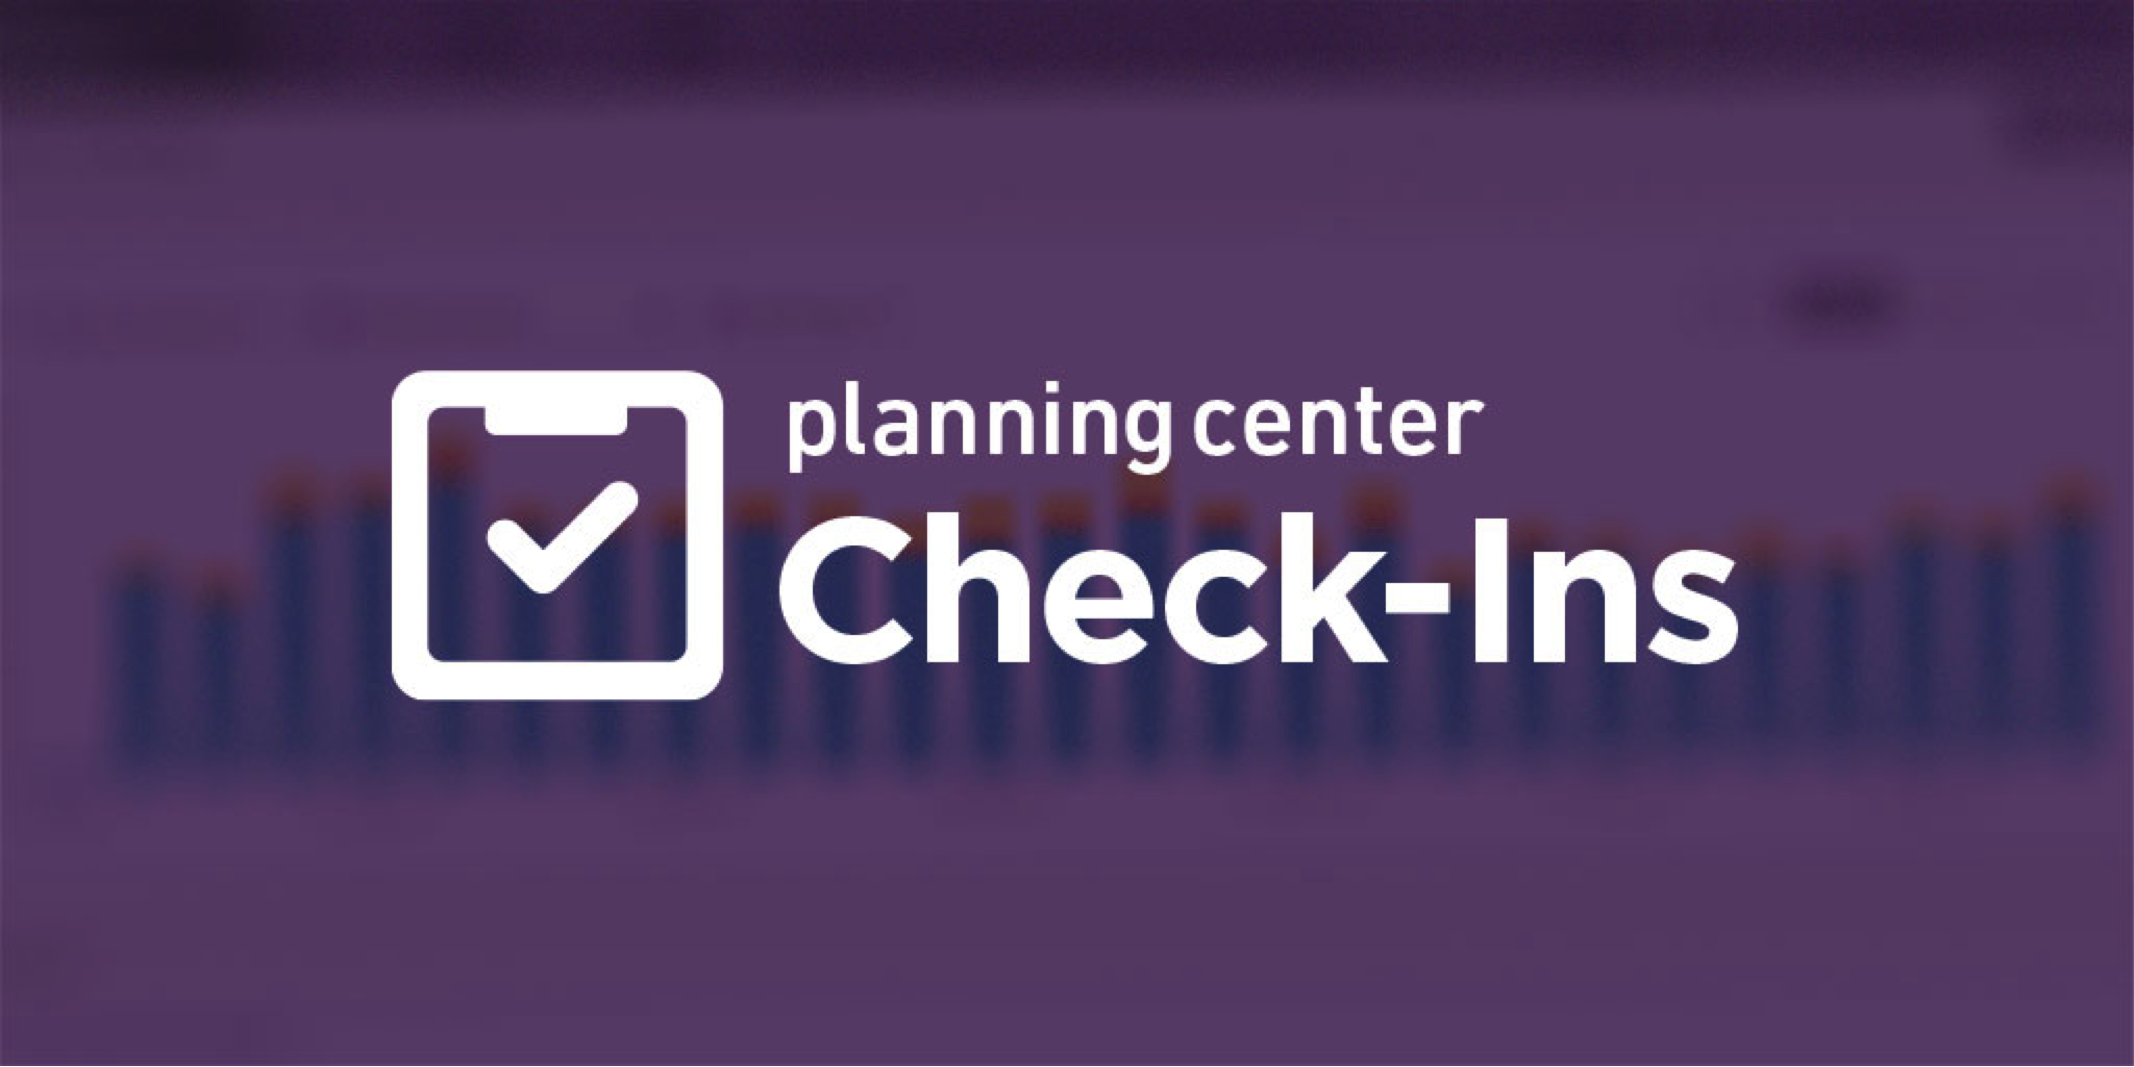 Your Church’s Check-In Solution